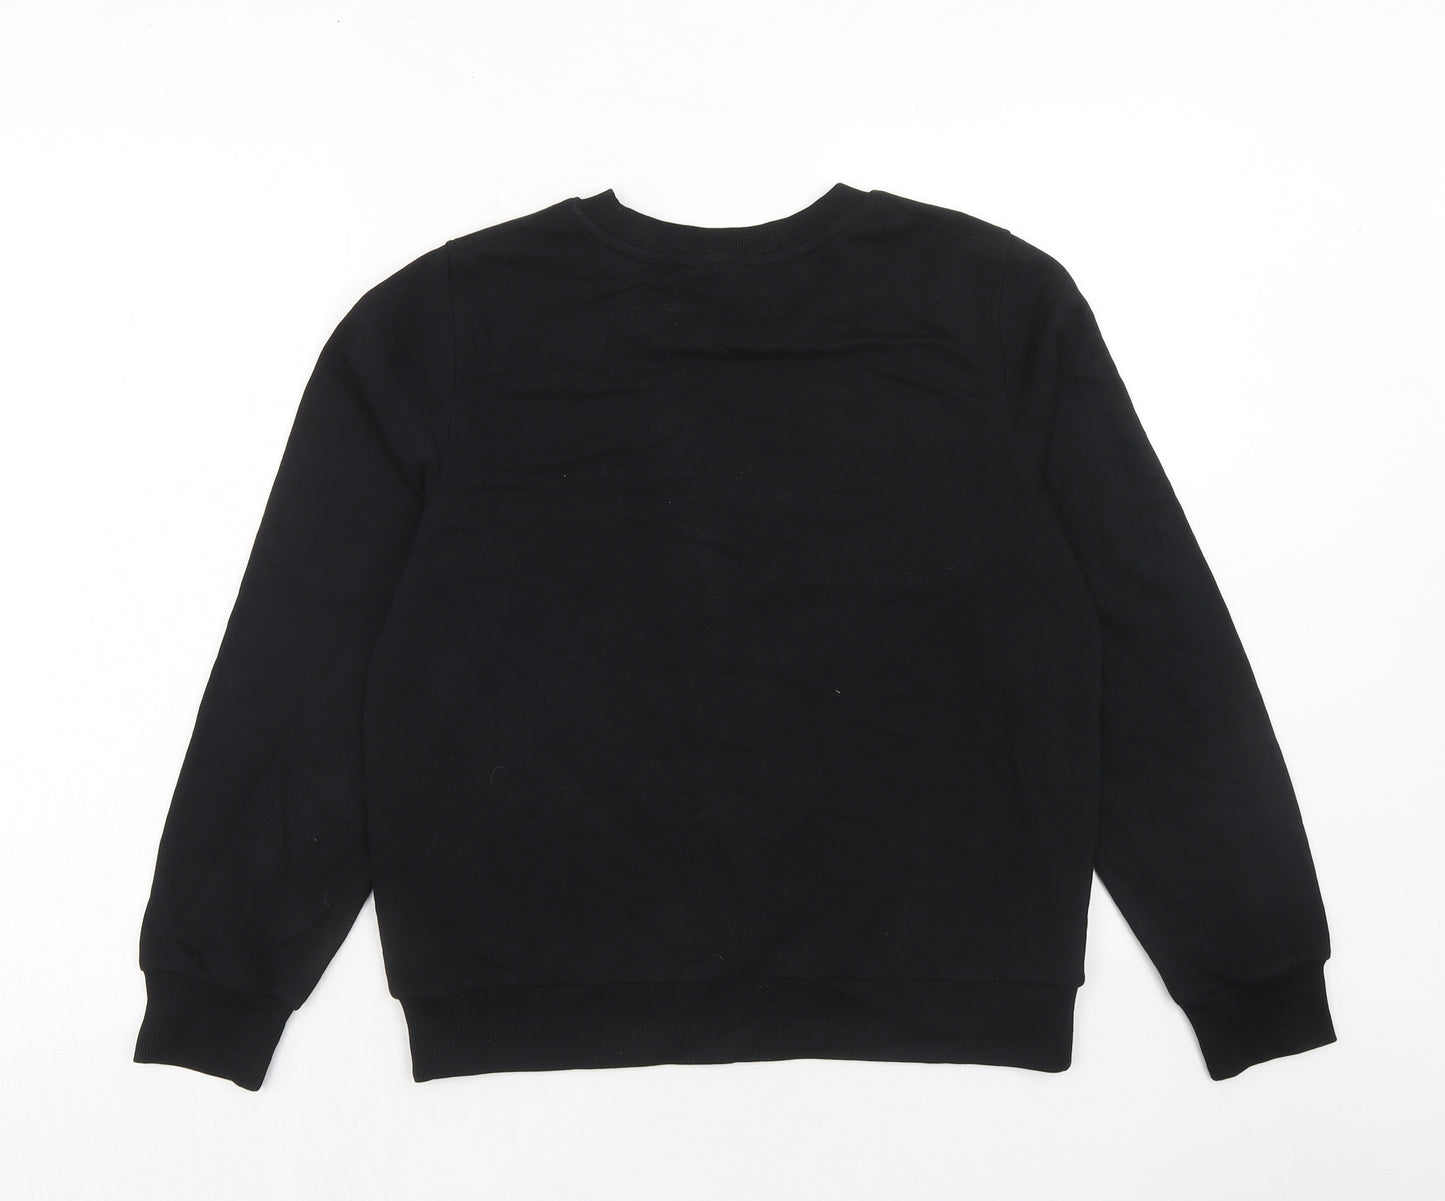 Marks and Spencer Womens Black Cotton Pullover Sweatshirt Size 12 Pullover - Cymru, Wales